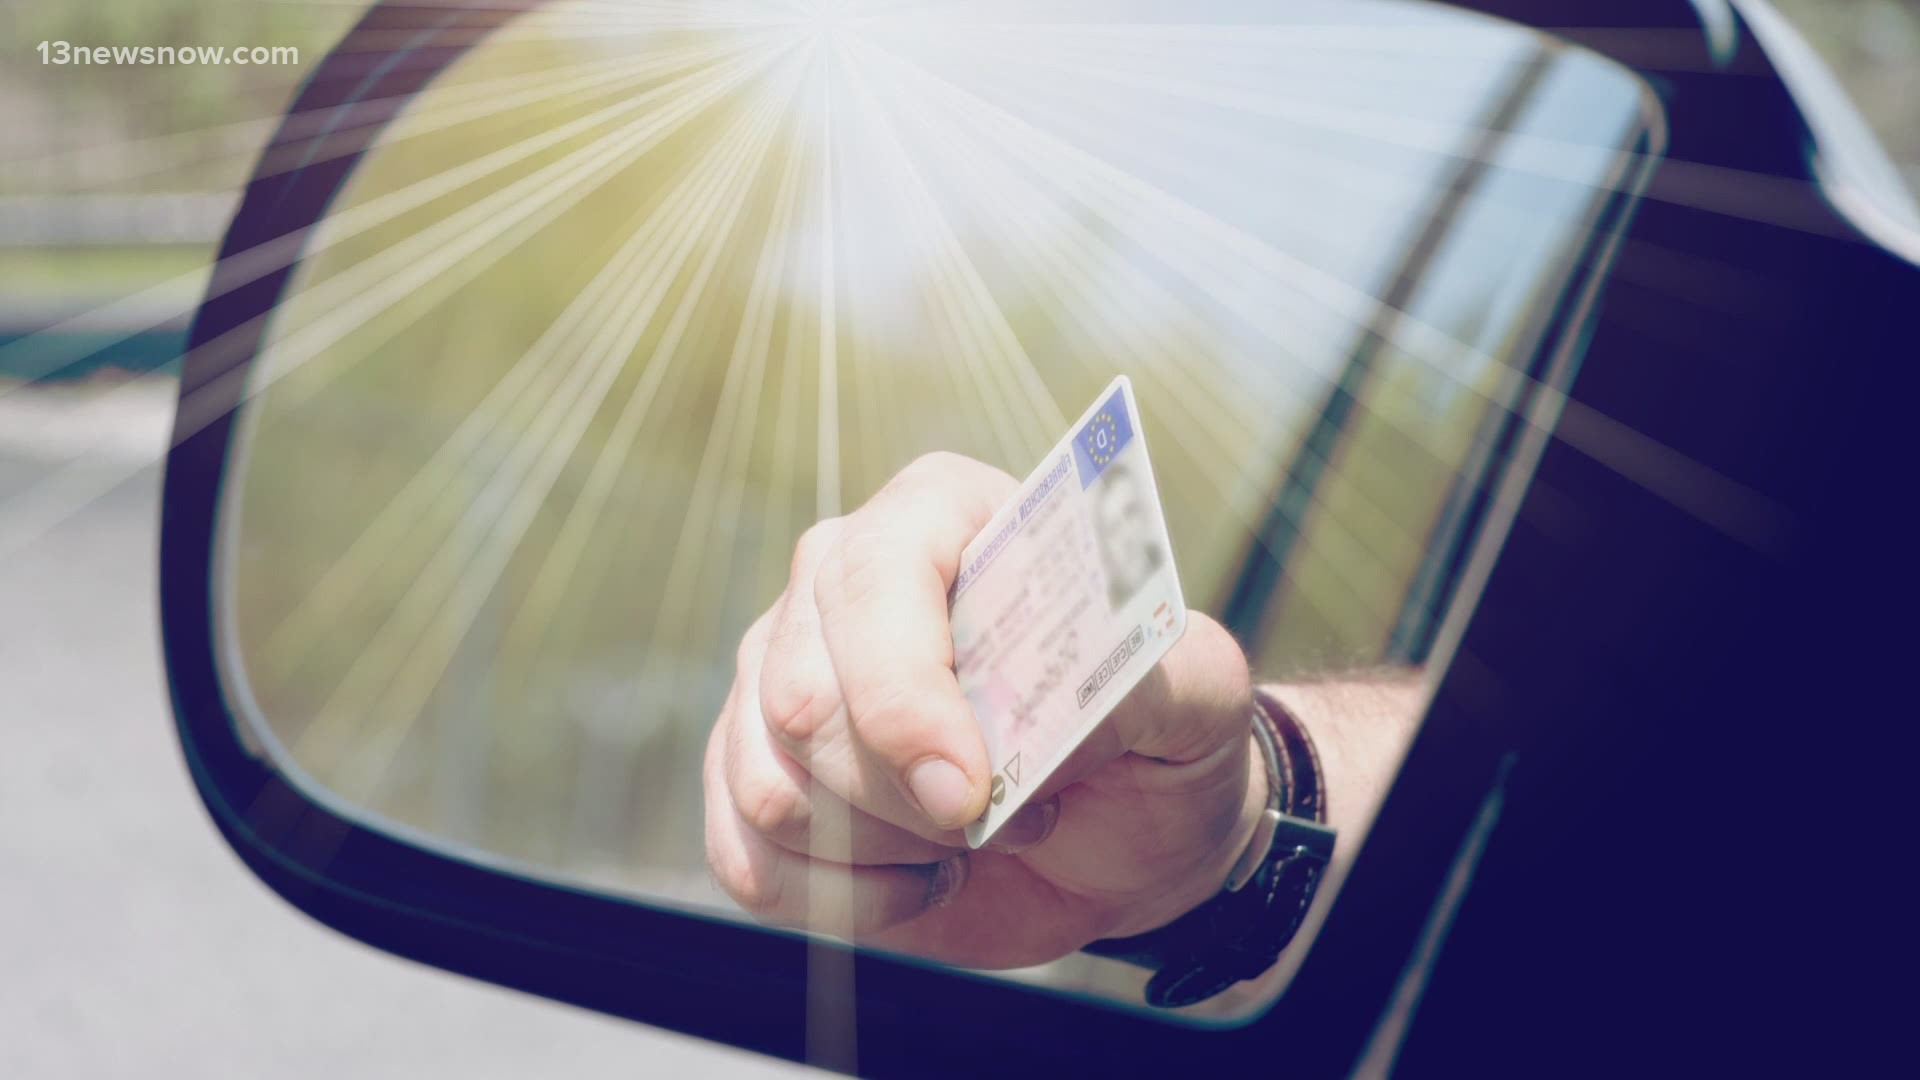 A new law in Virginia that gives undocumented immigrants access to driver privilege cards. As Adriana De Alba explains, the card can't be used to vote or at airports